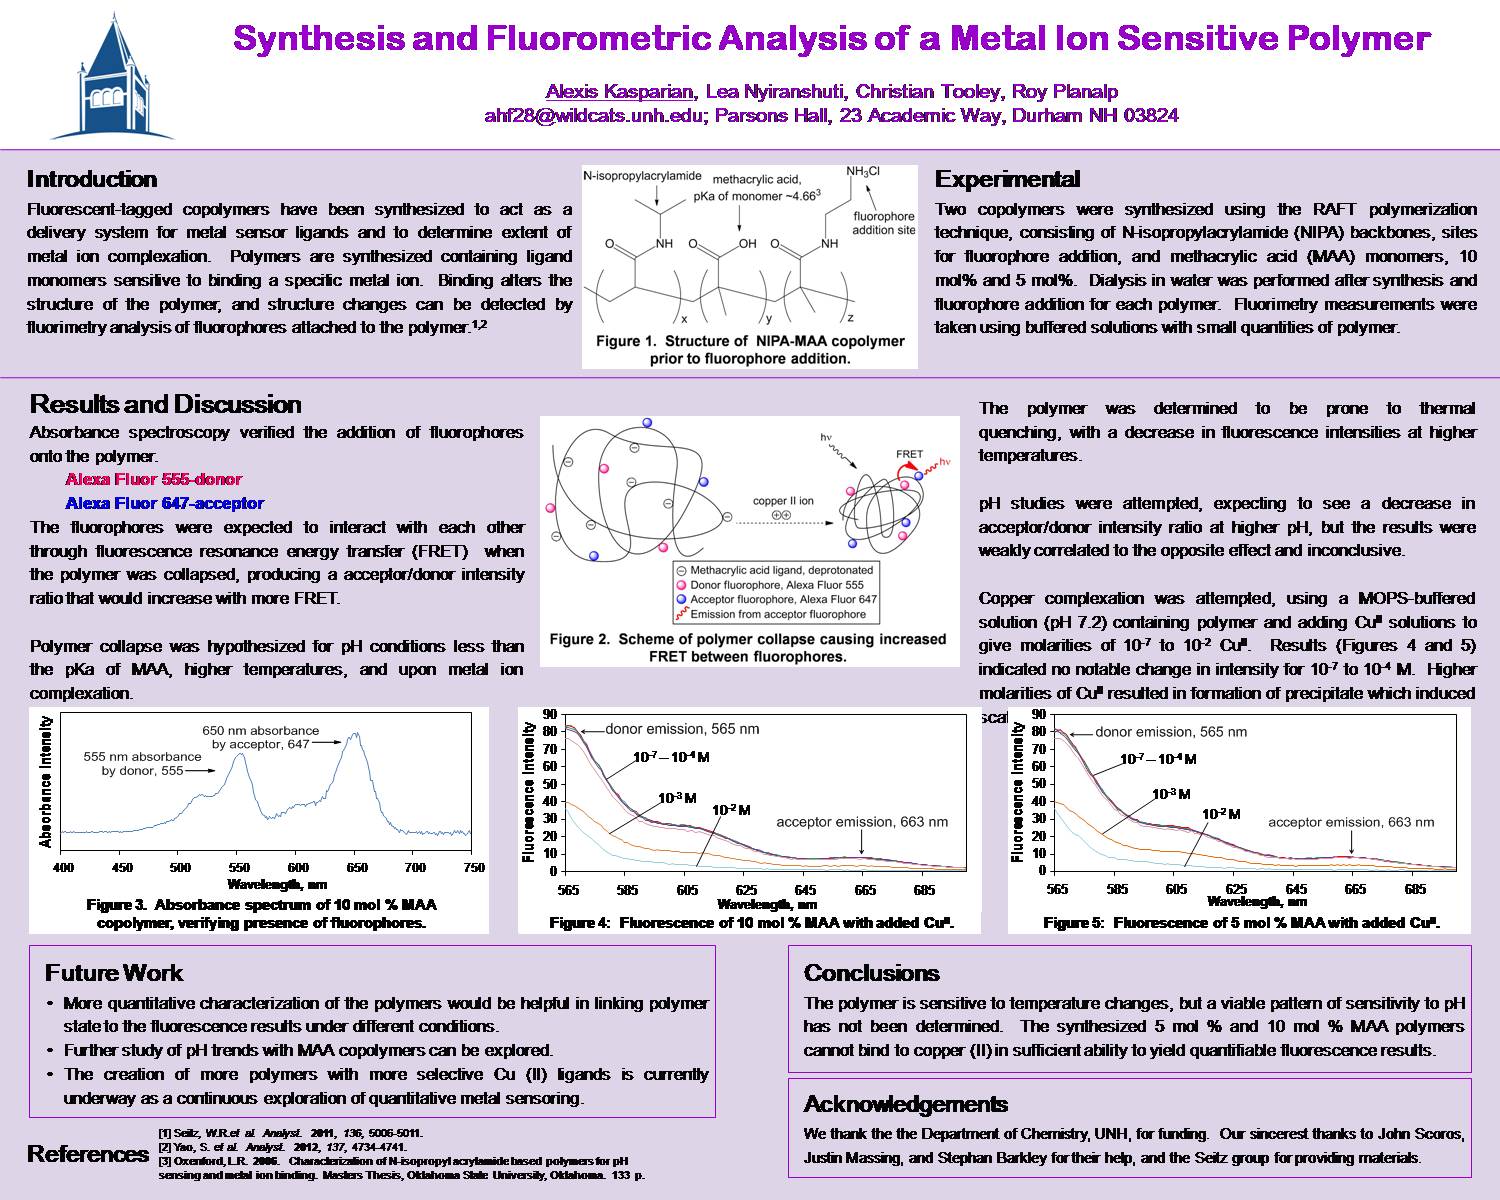 Synthesis And Fluorometric Analysis Of A Metal Ion Sensitive Polymer by LexieKas